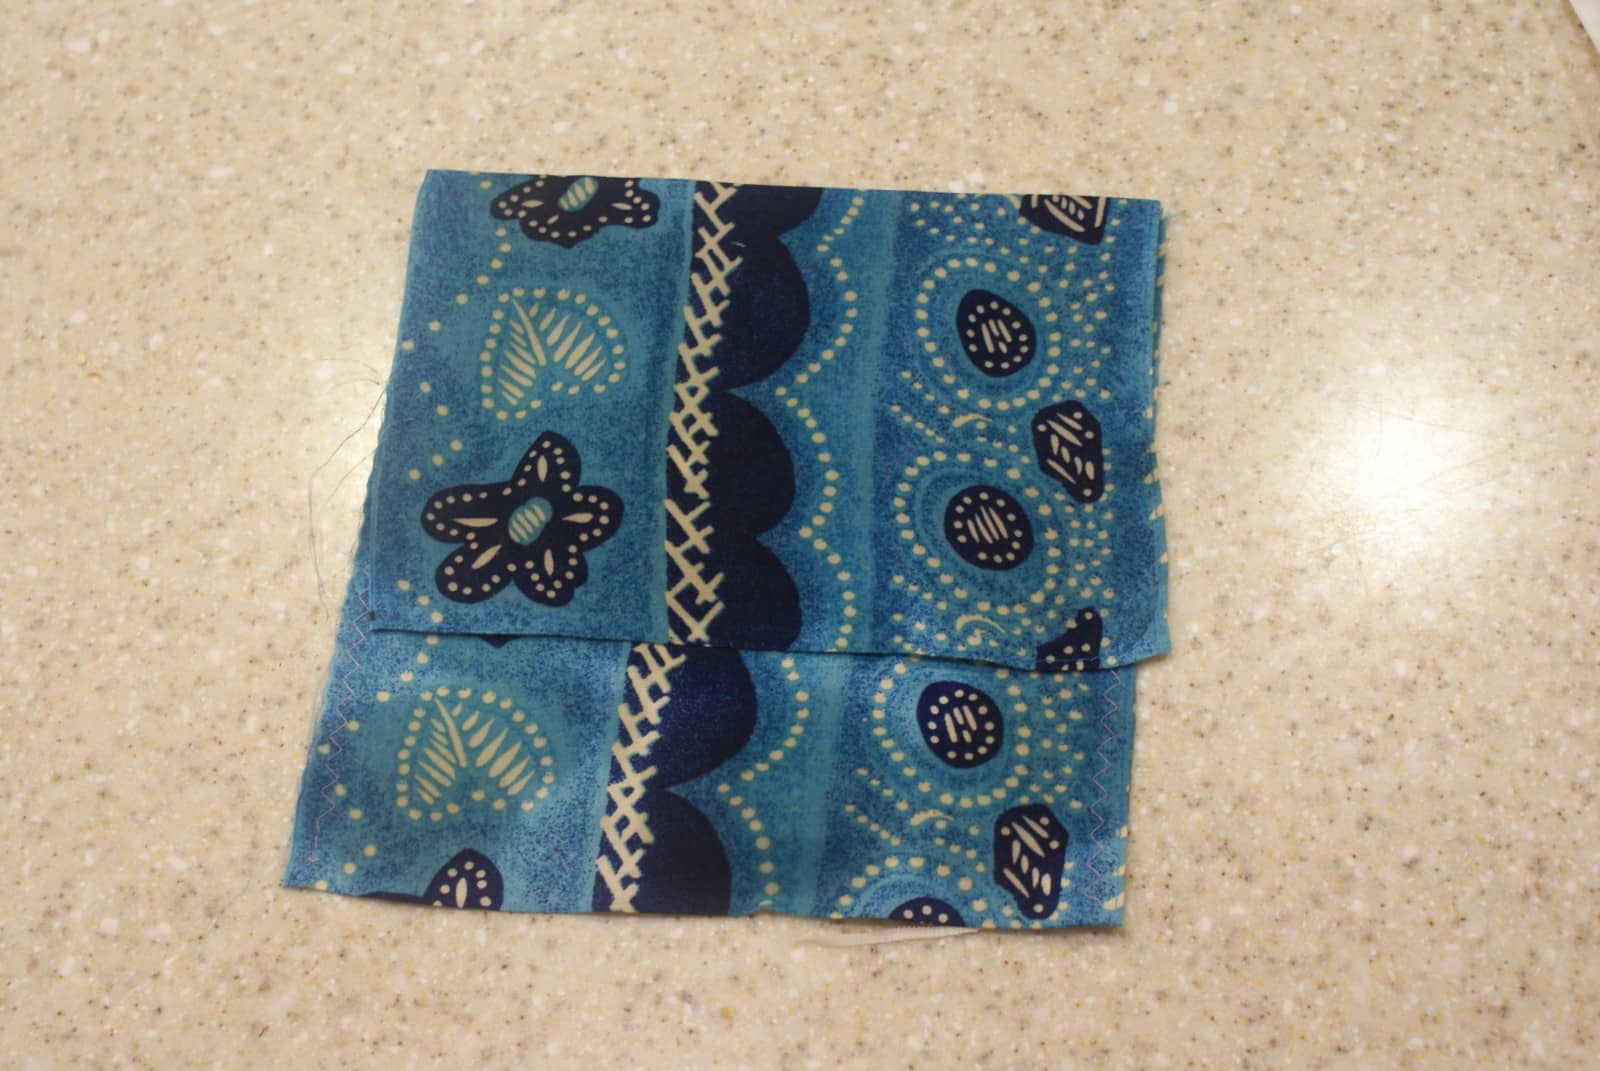 a beeswax sandwich bag, in a blue patterned fabric. 